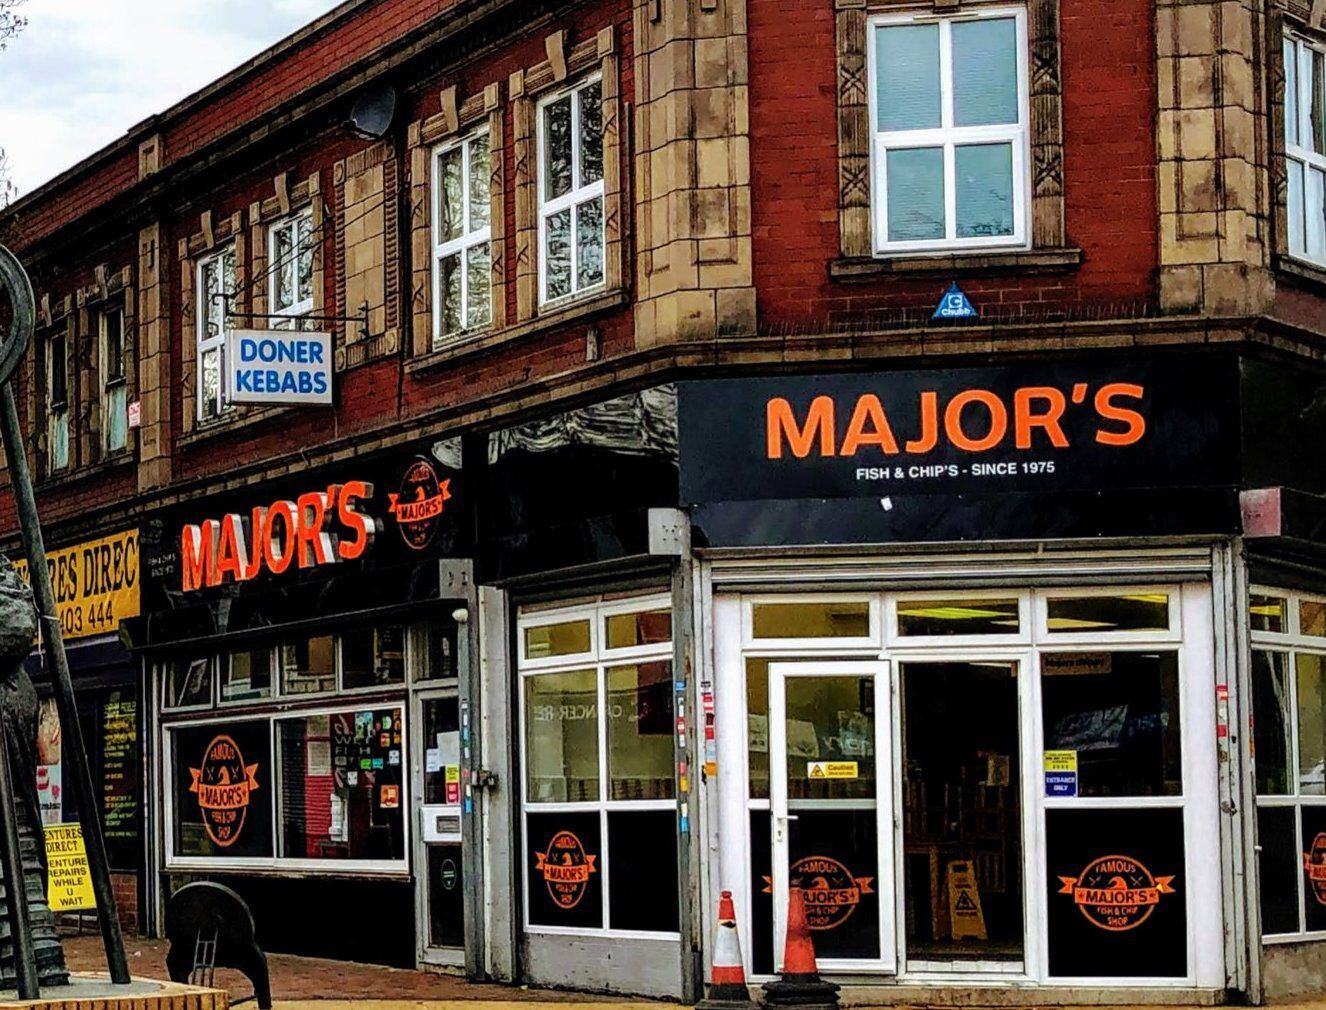 Major's Chippy: Looking back on 'institution' of Bilston town famous for its orange chips as new ownership announced
